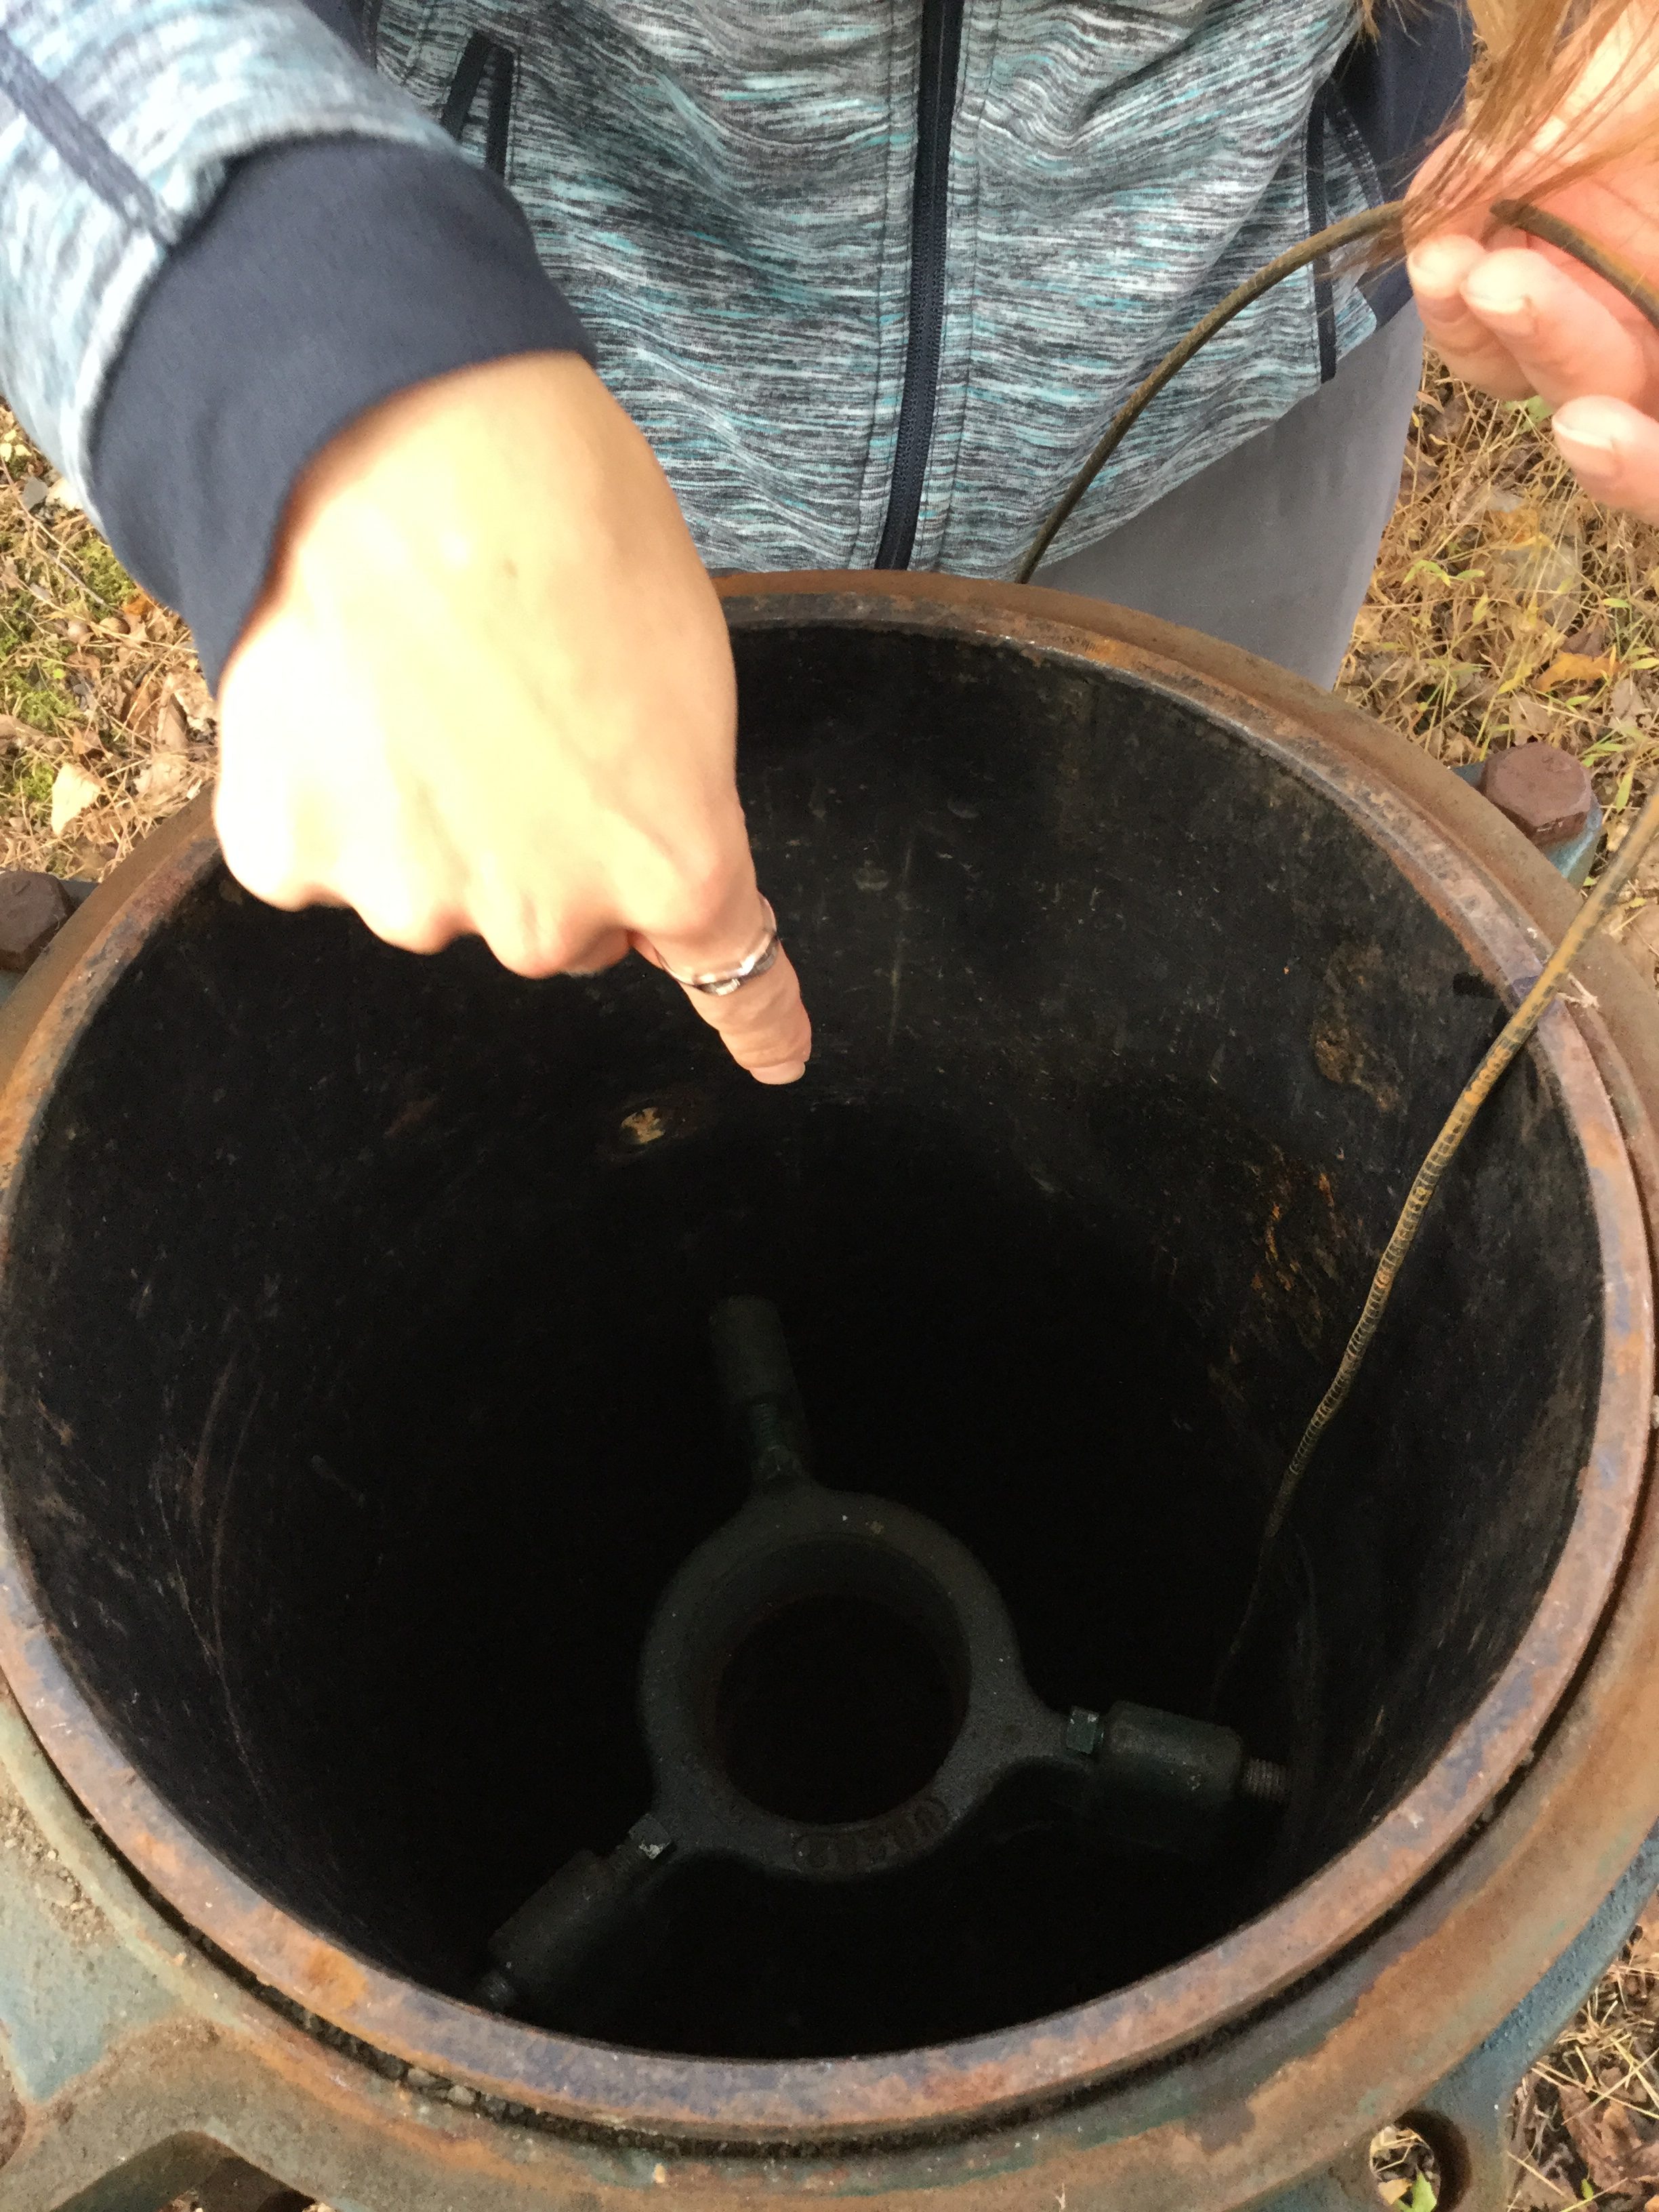 rachel pointing into a well, with the probe down inside of it.